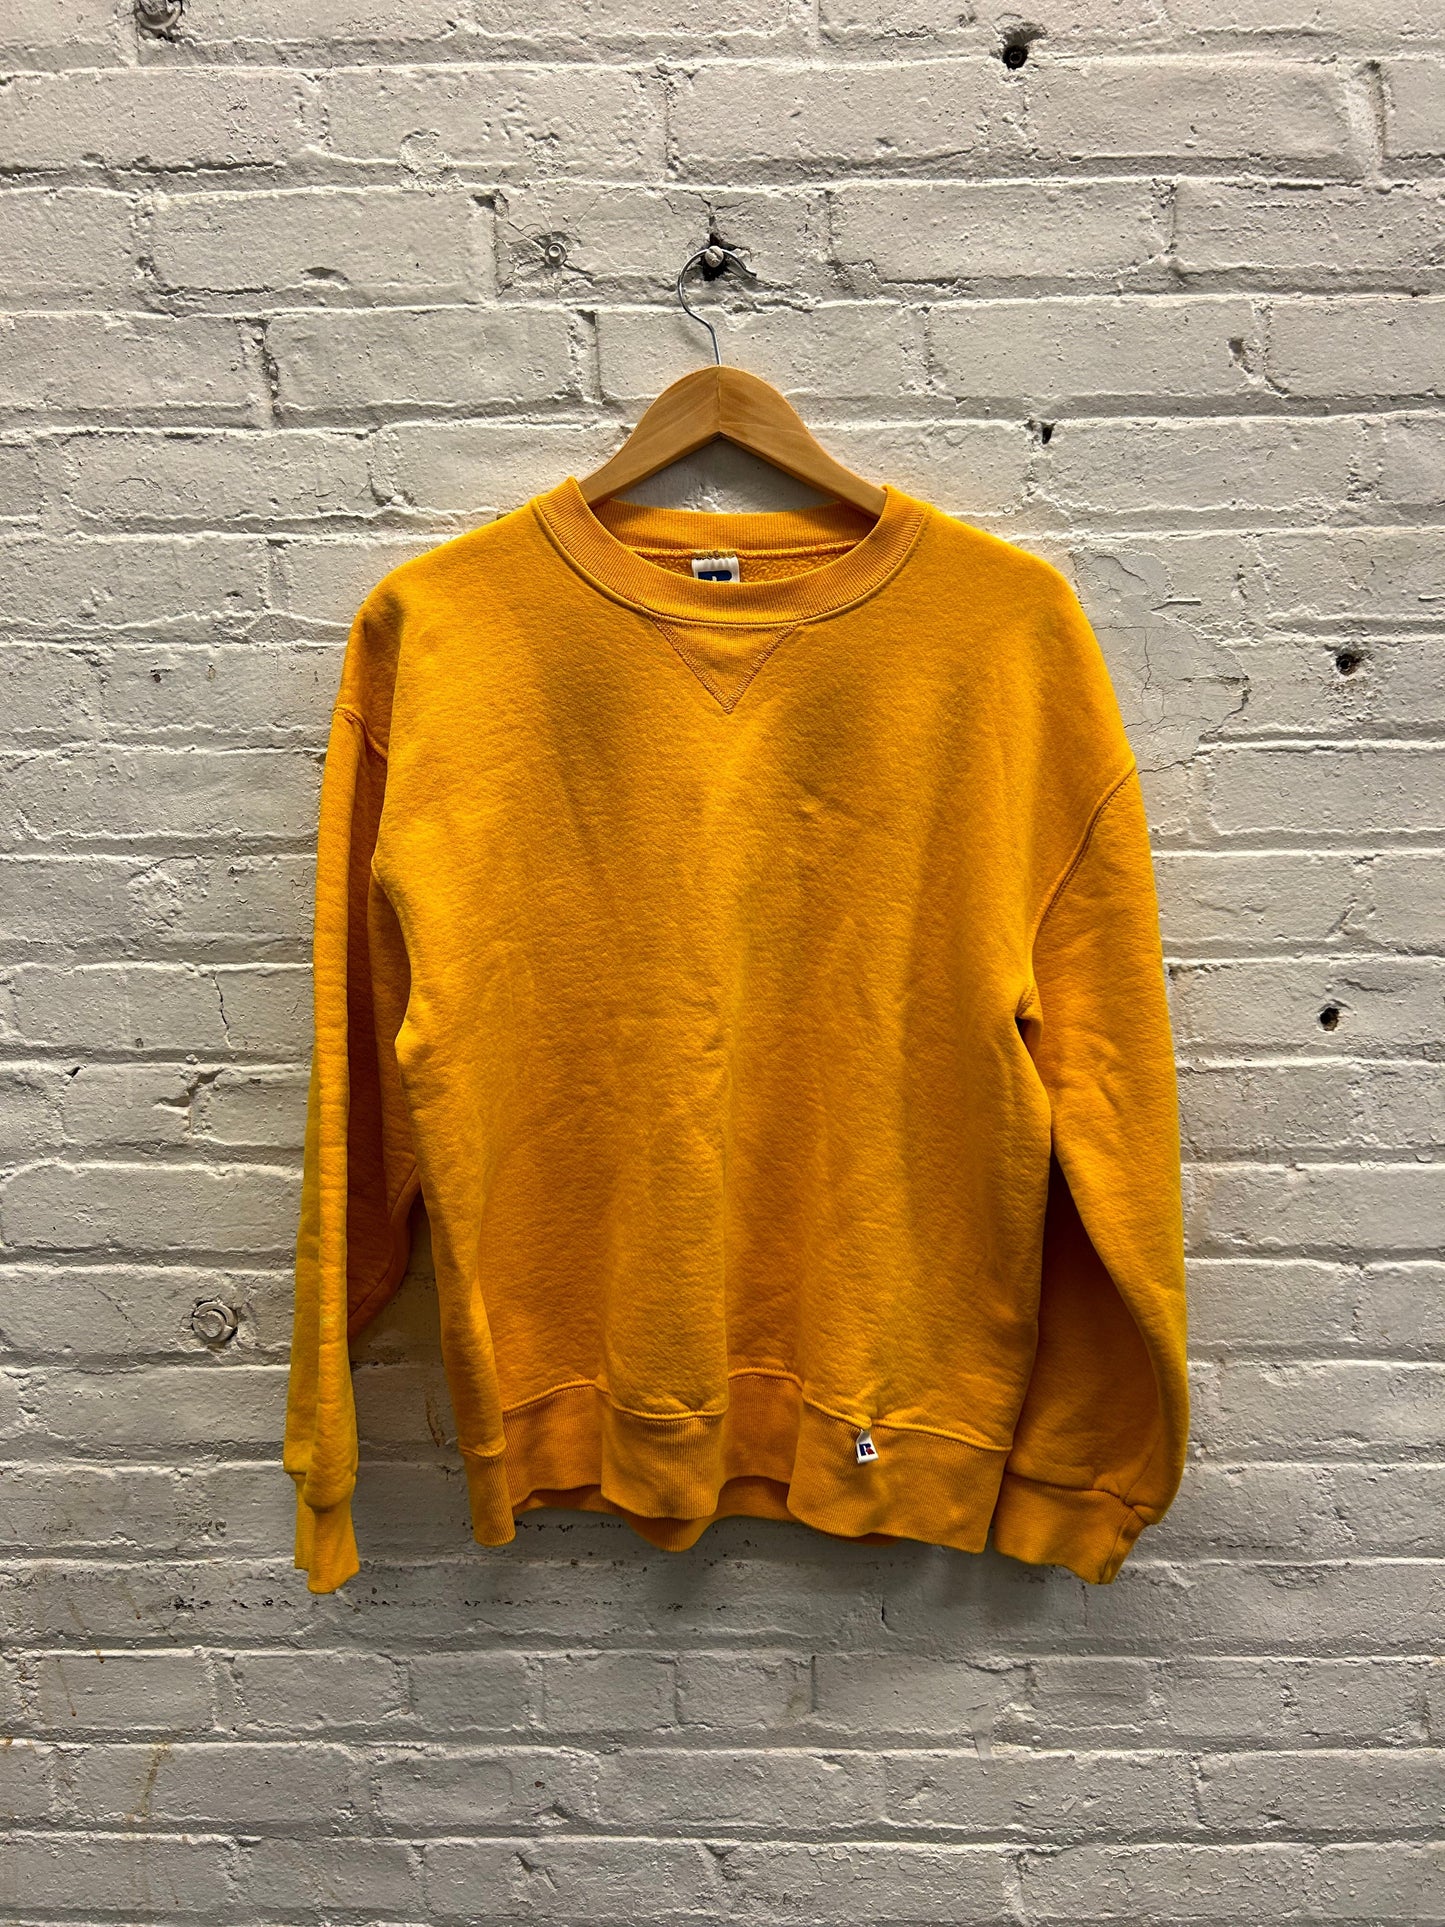 Russell Athletic Yellow Crewneck - Large